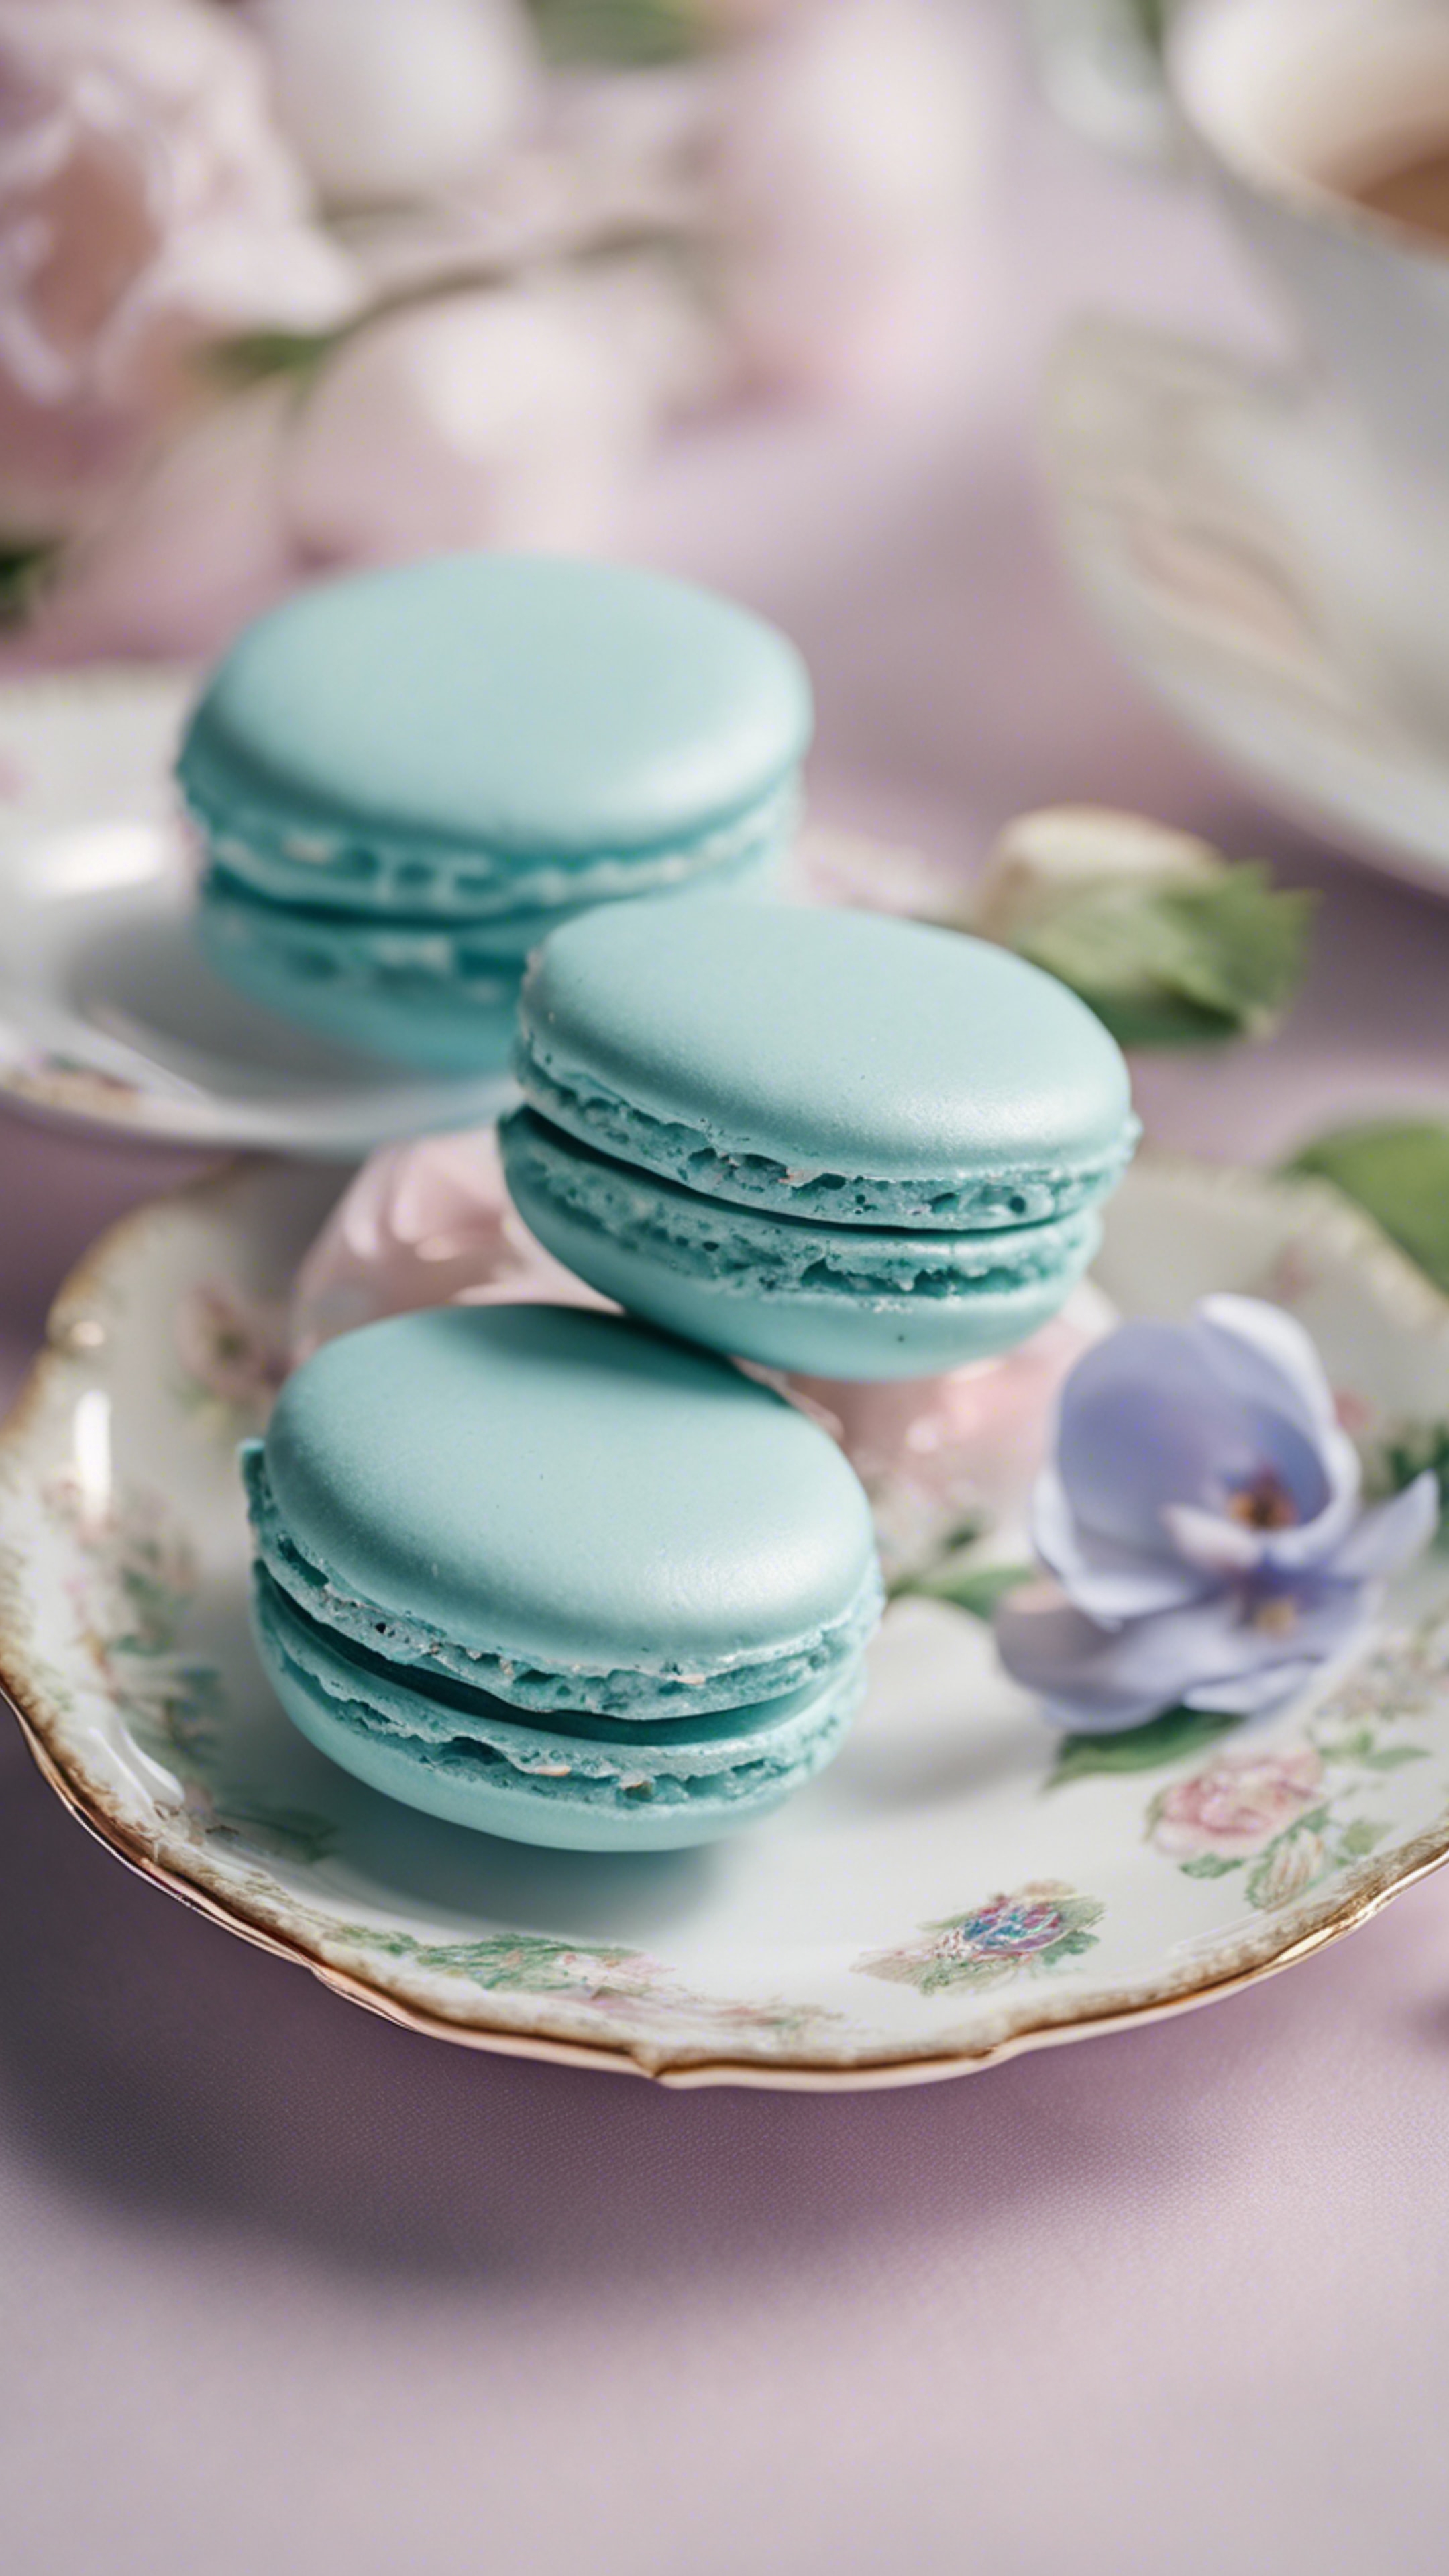 A pair of pastel blue French macarons on a dainty floral china plate. Wallpaper[cc240826fa4e4ee284e3]